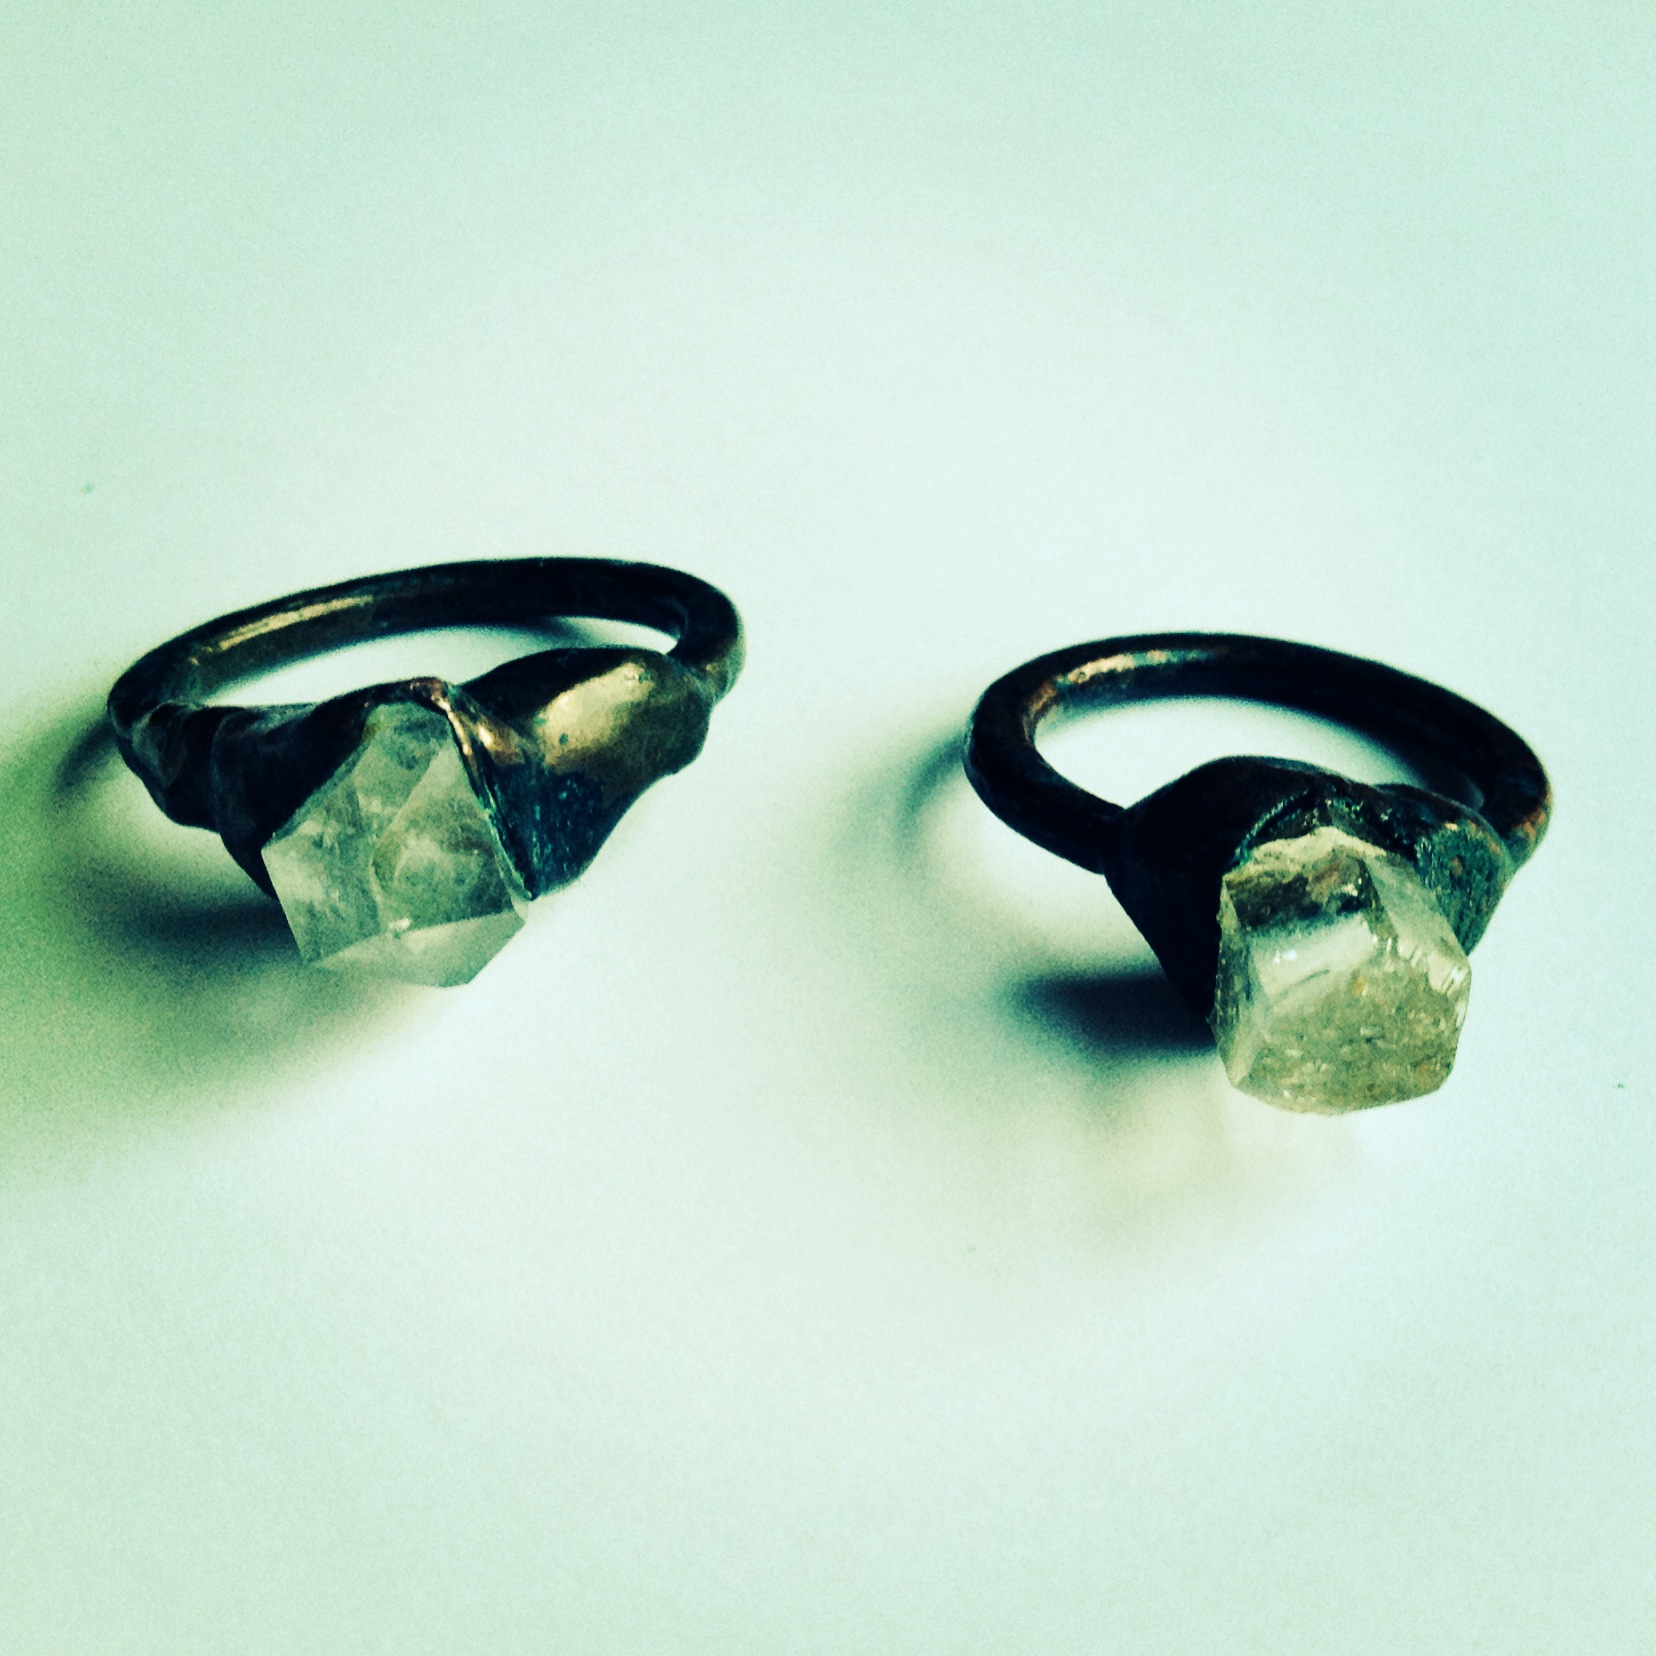 quartz crystal rings (arkansas) electroformed in copper with added patina